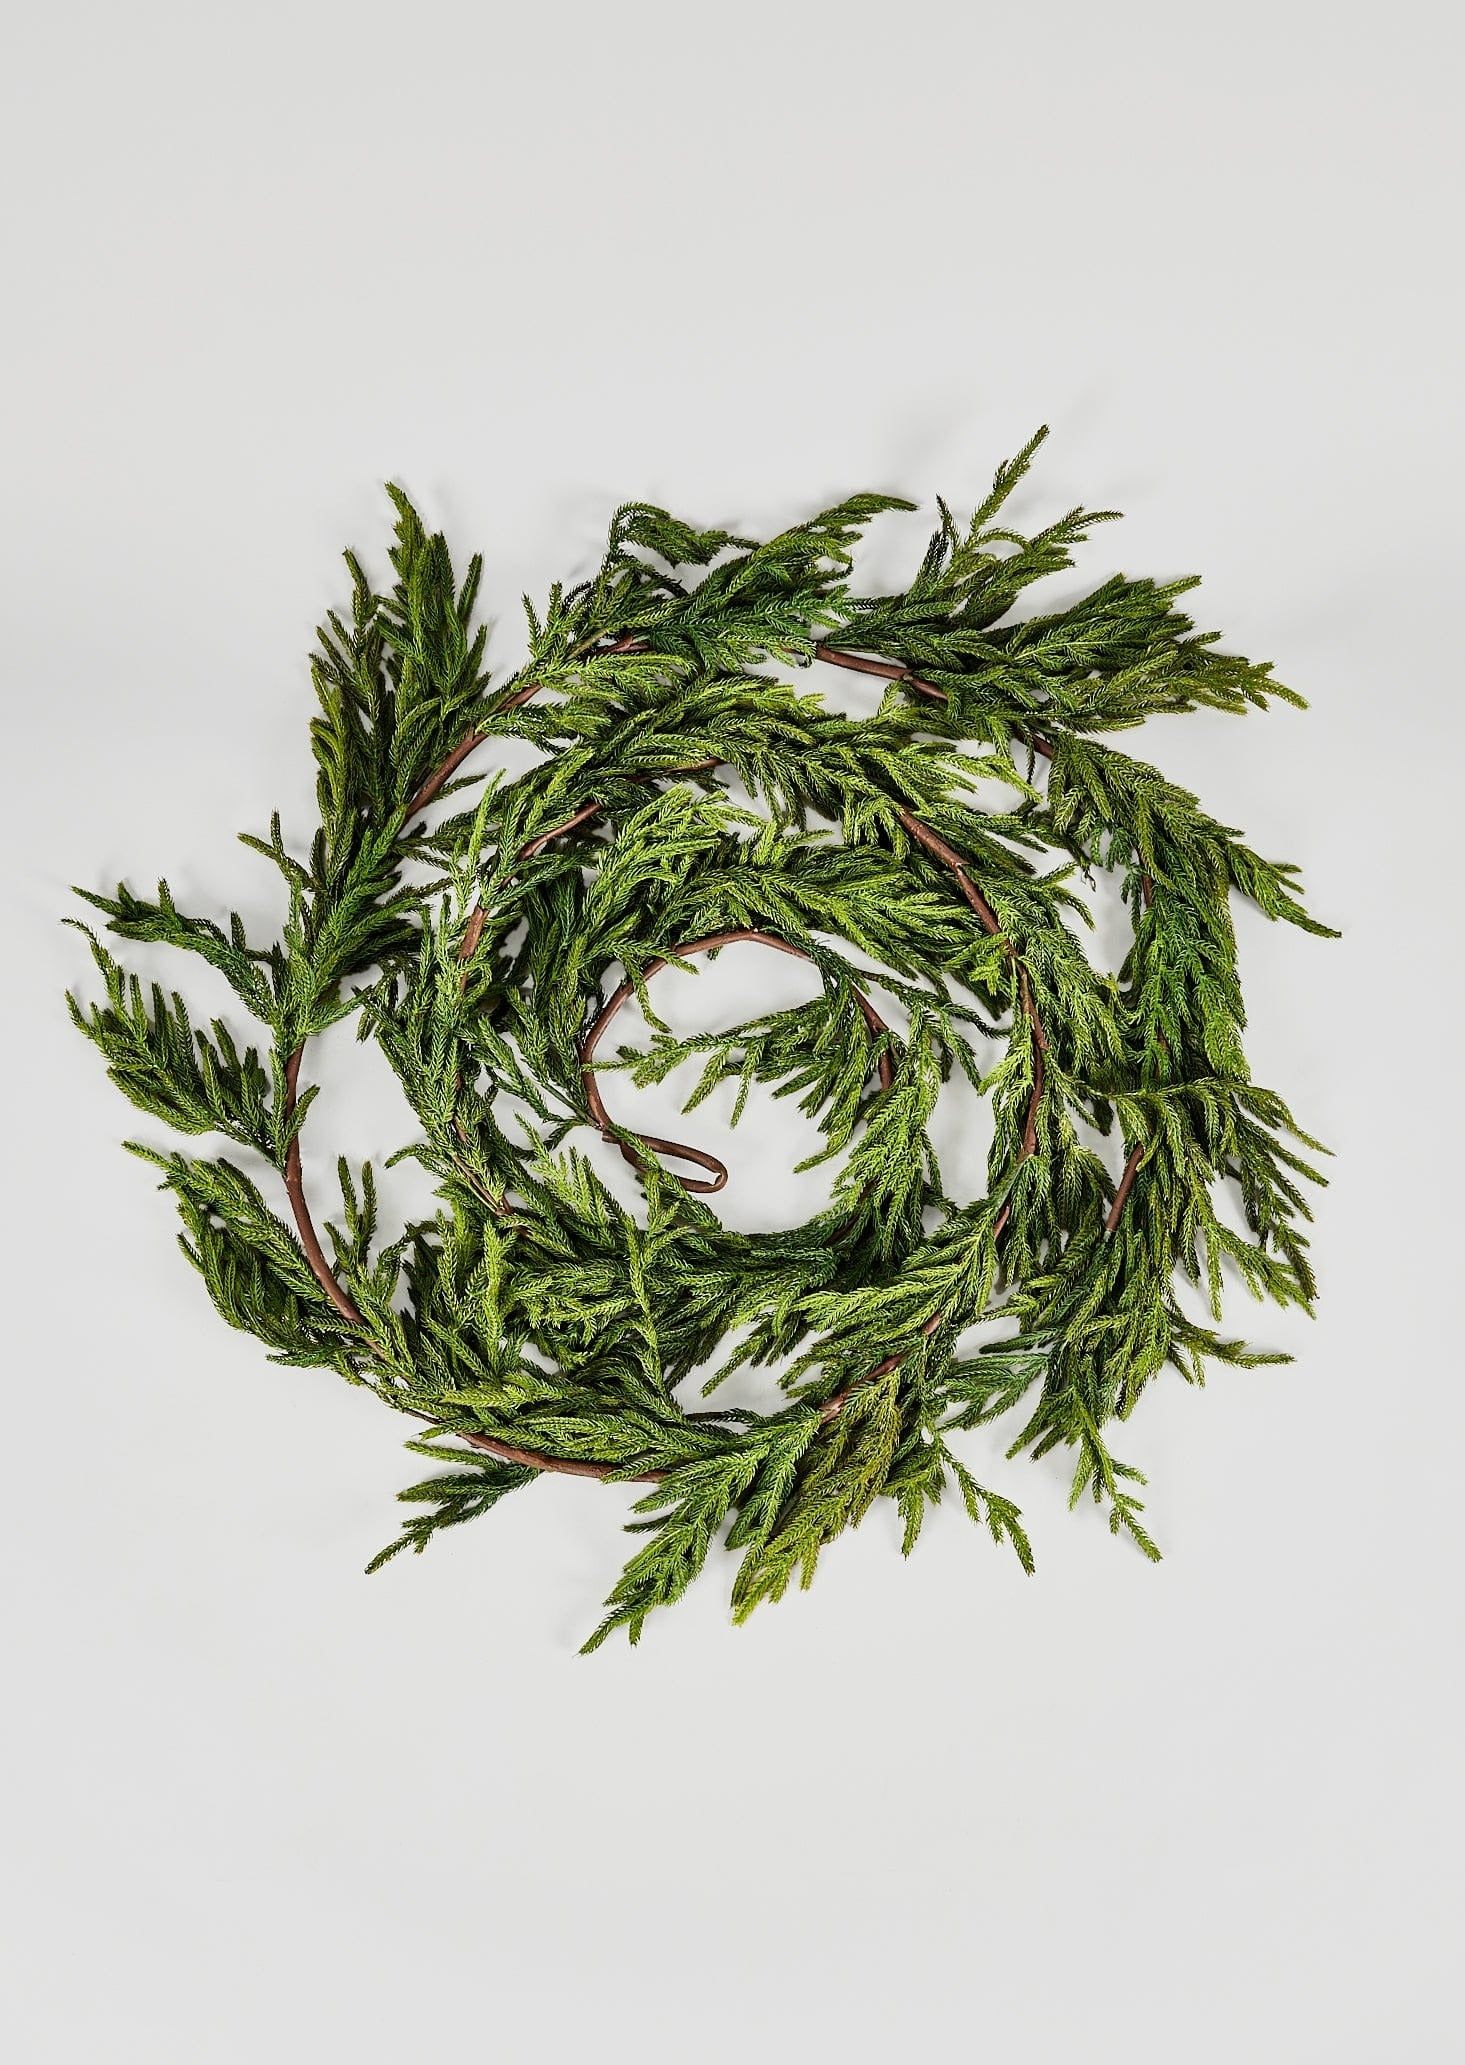 Afloral Real Touch Norfolk Pine Garland - 180" Long | Afloral